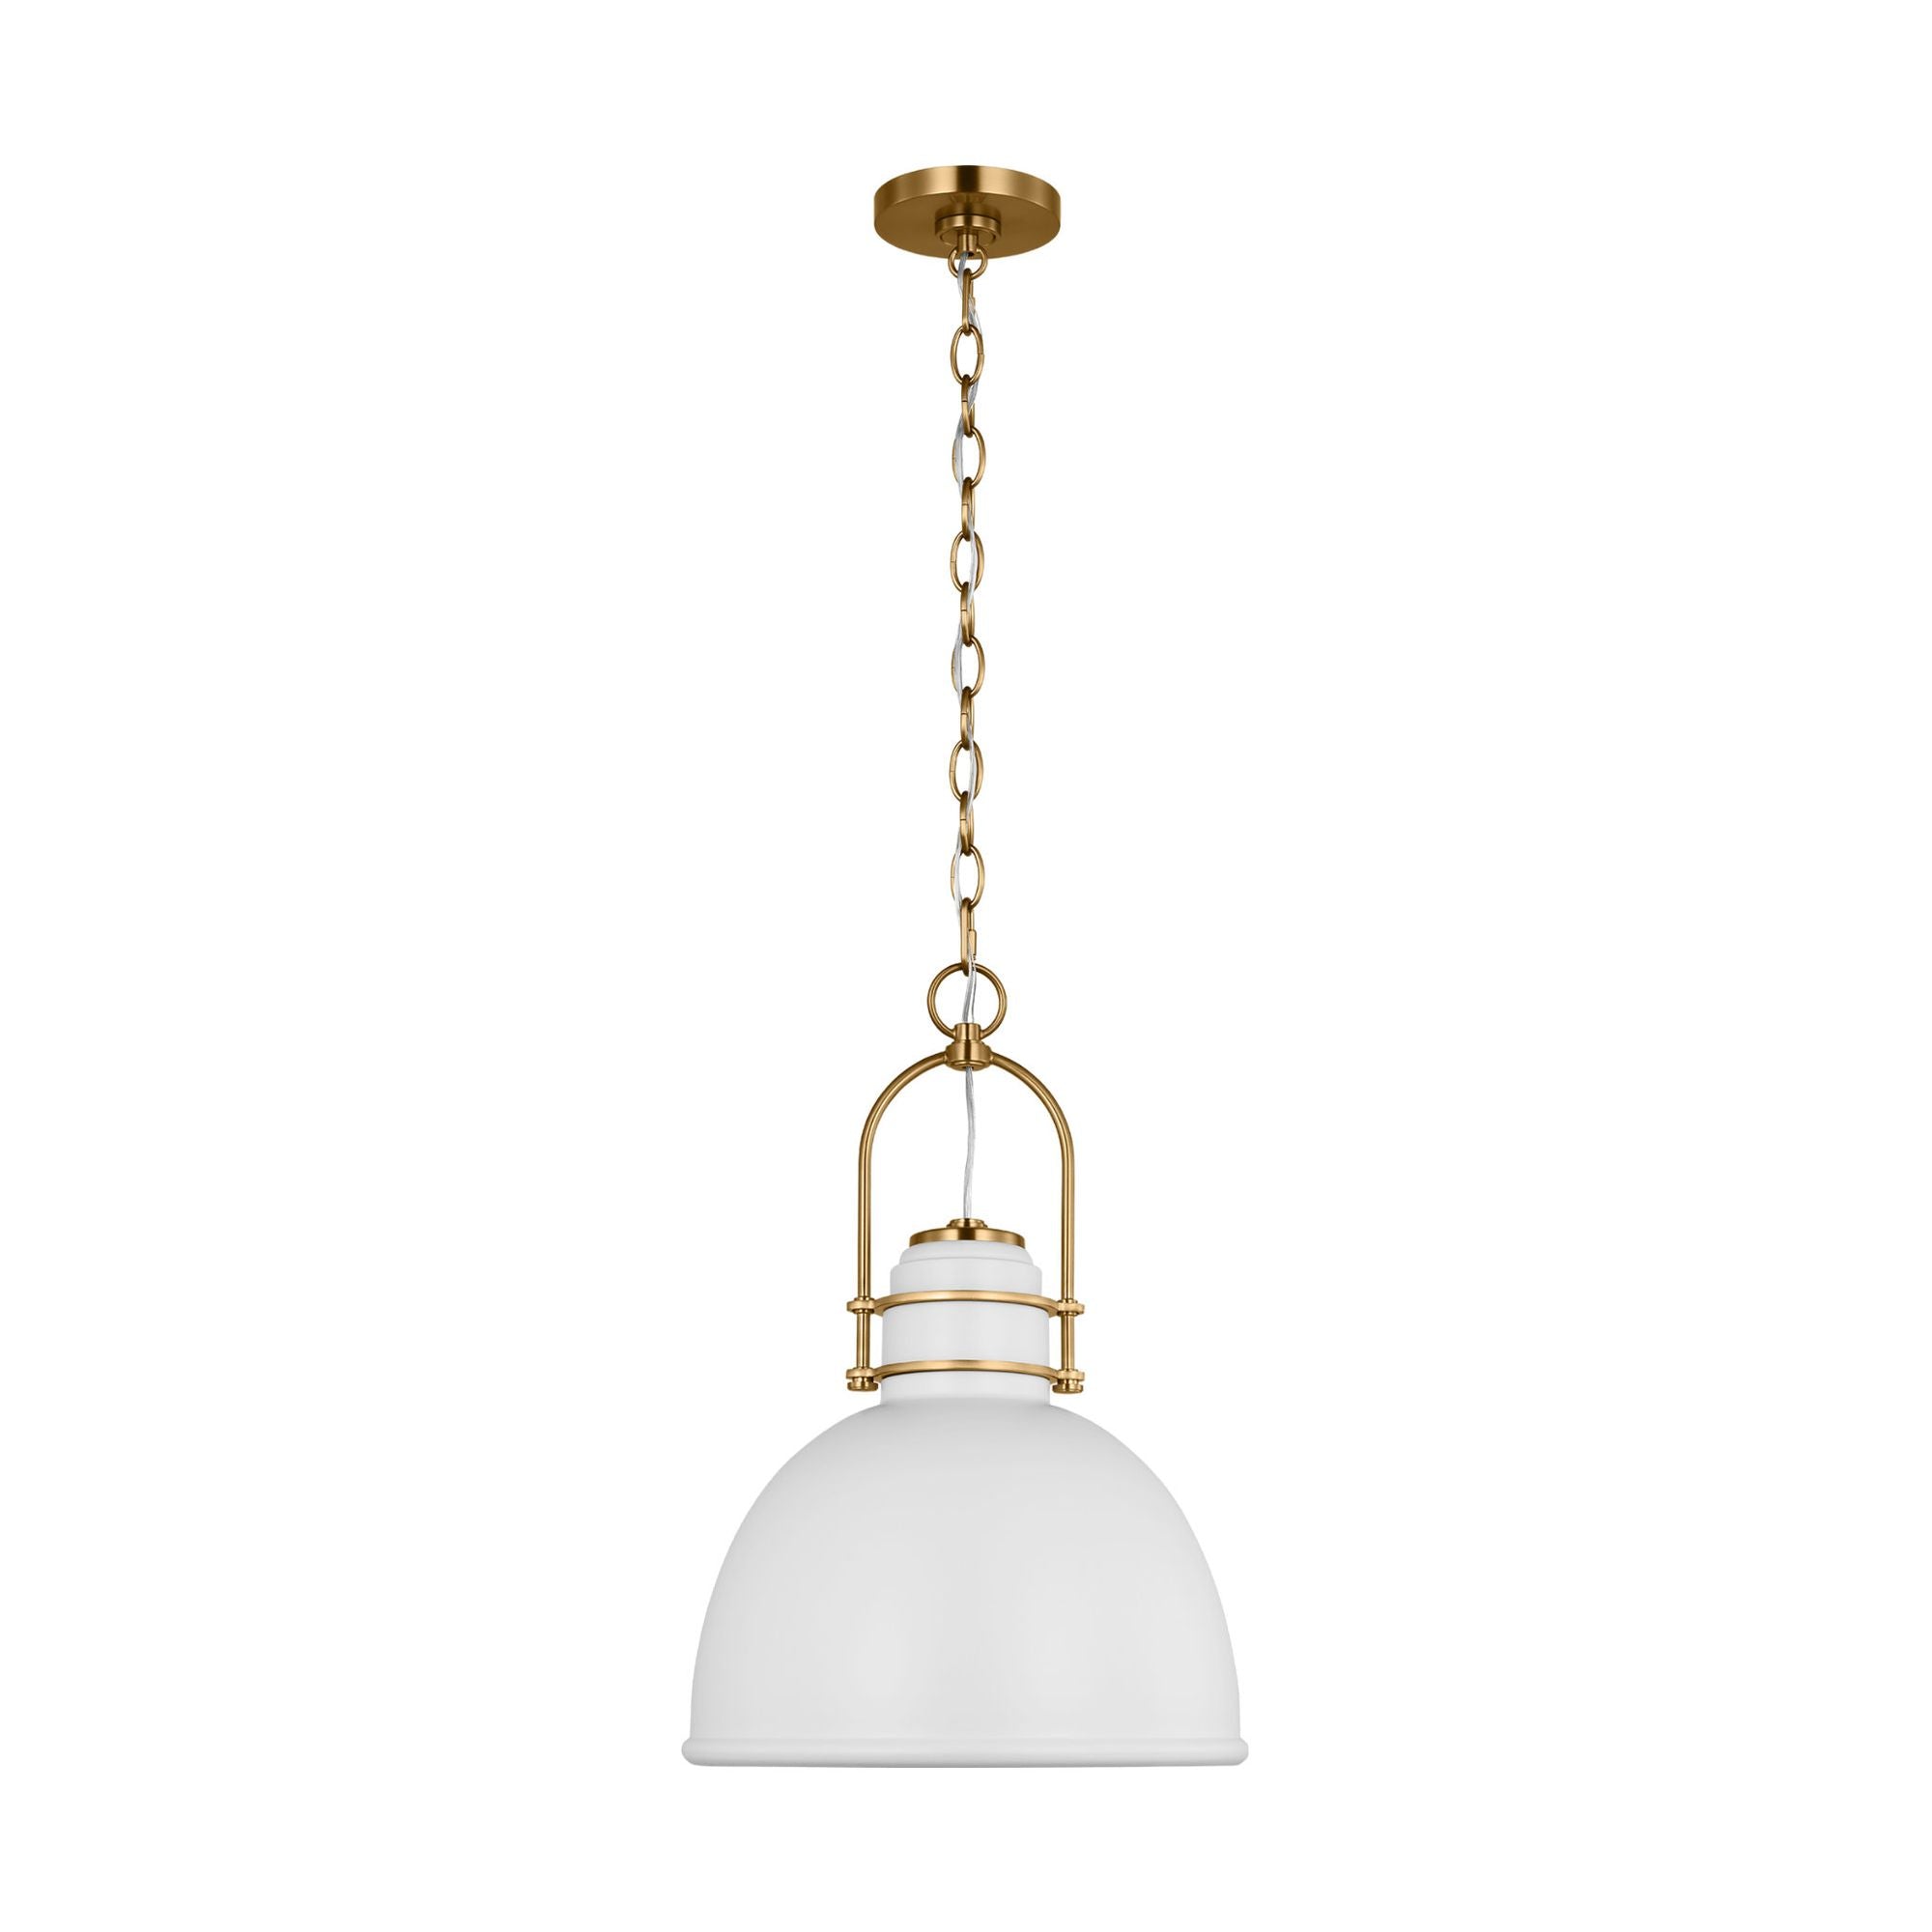 Chapman & Myers Upland Extra Large Pendant in Matte White and Burnished Brass